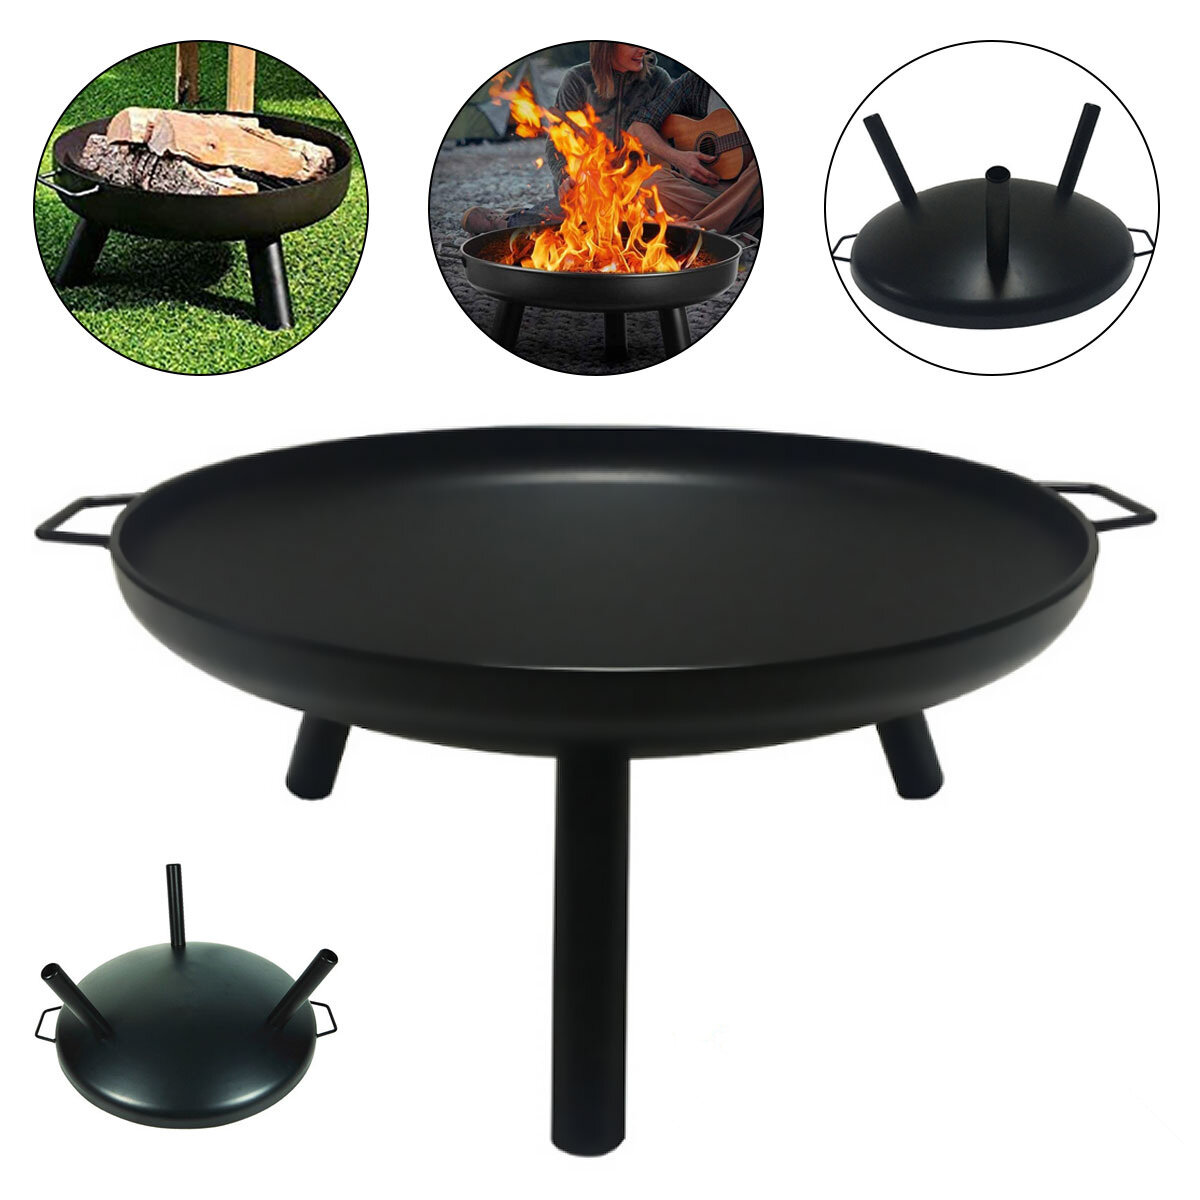 24inch Fire Pit Metal Outdoors Barbecue, Fire Pit 24 Inch